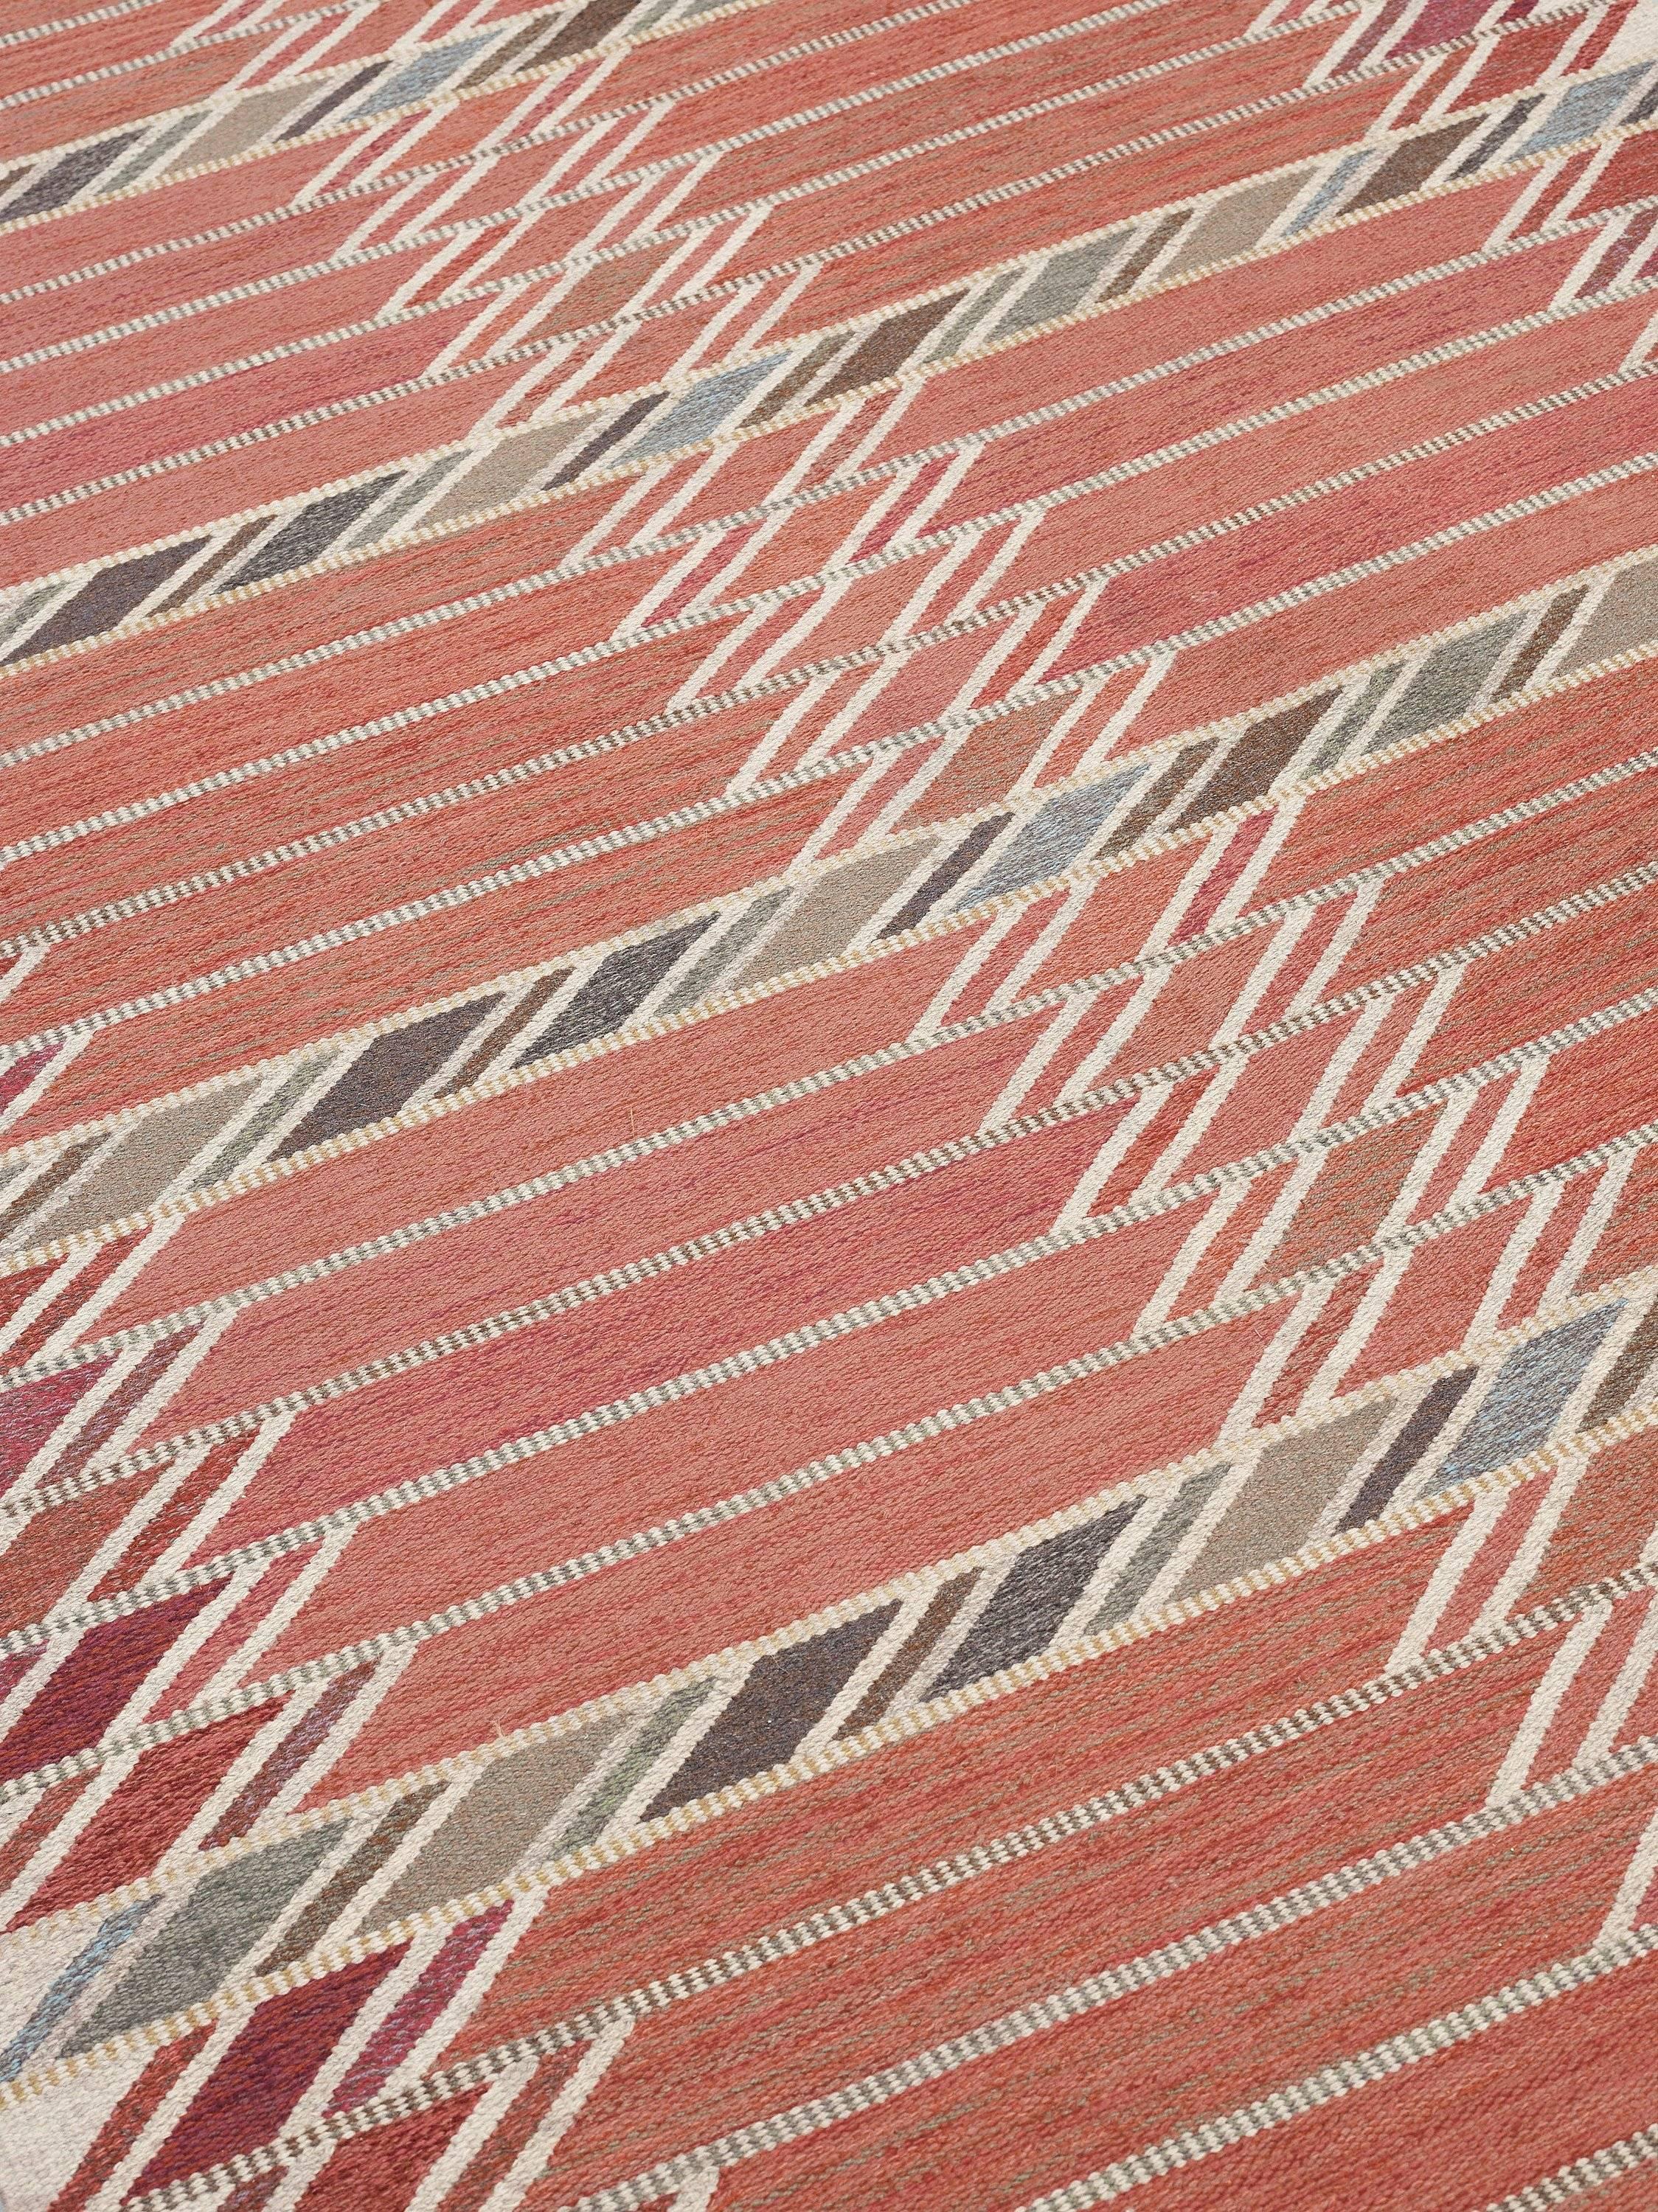 Swedish flat-woven tapestry technique rug. Designed by Ingrid dessau ( 1923-2000) in 1950-55. Inscribed 